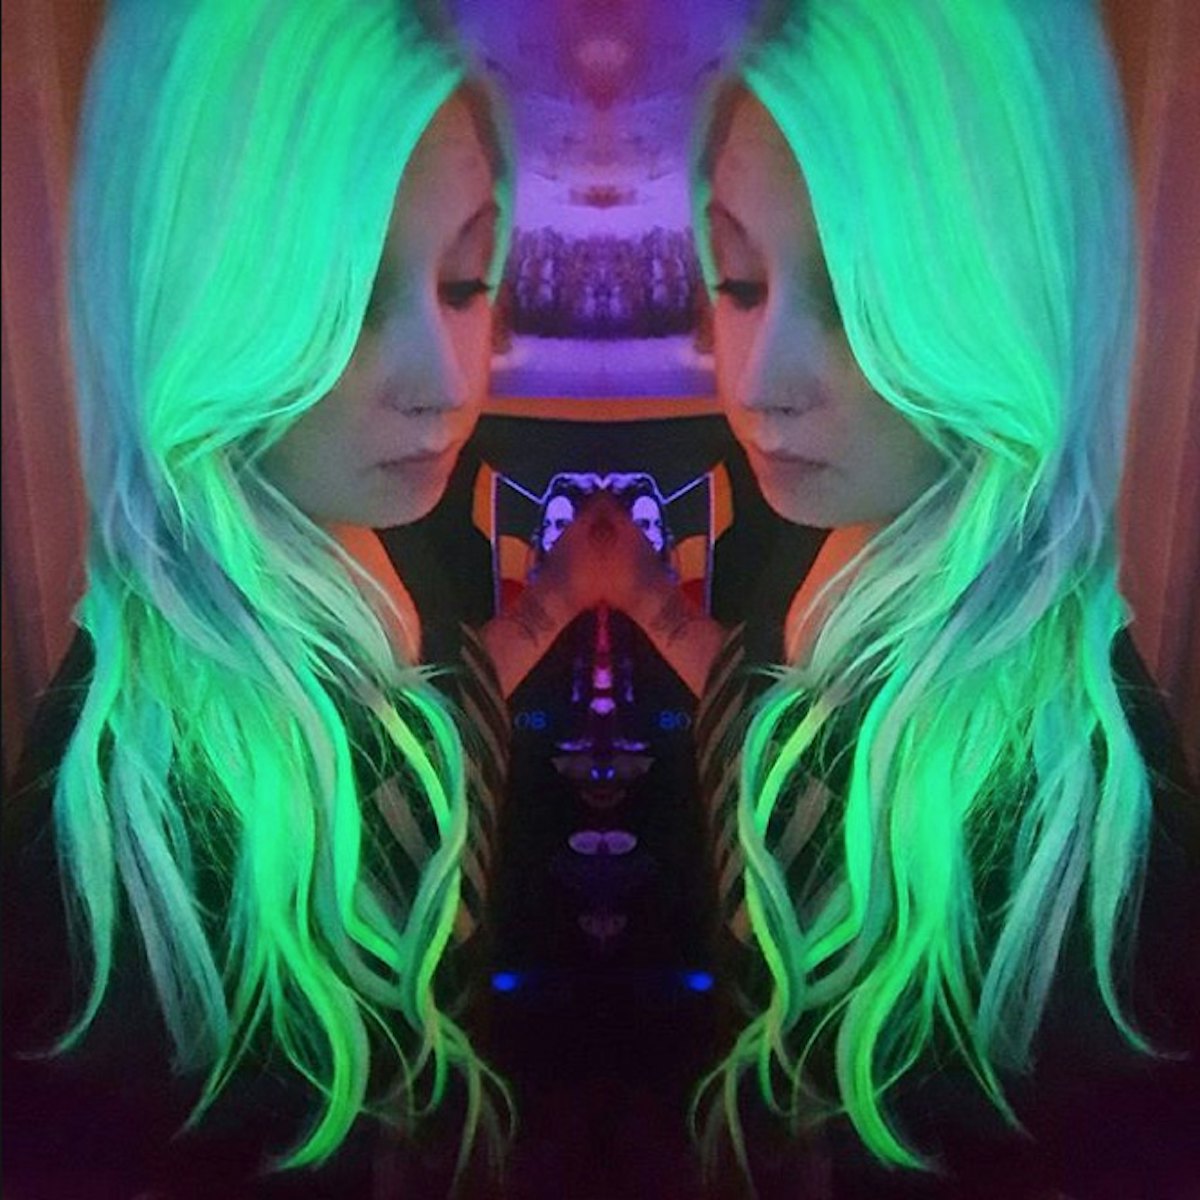 Glow-in-the-dark hair is the latest beauty trend